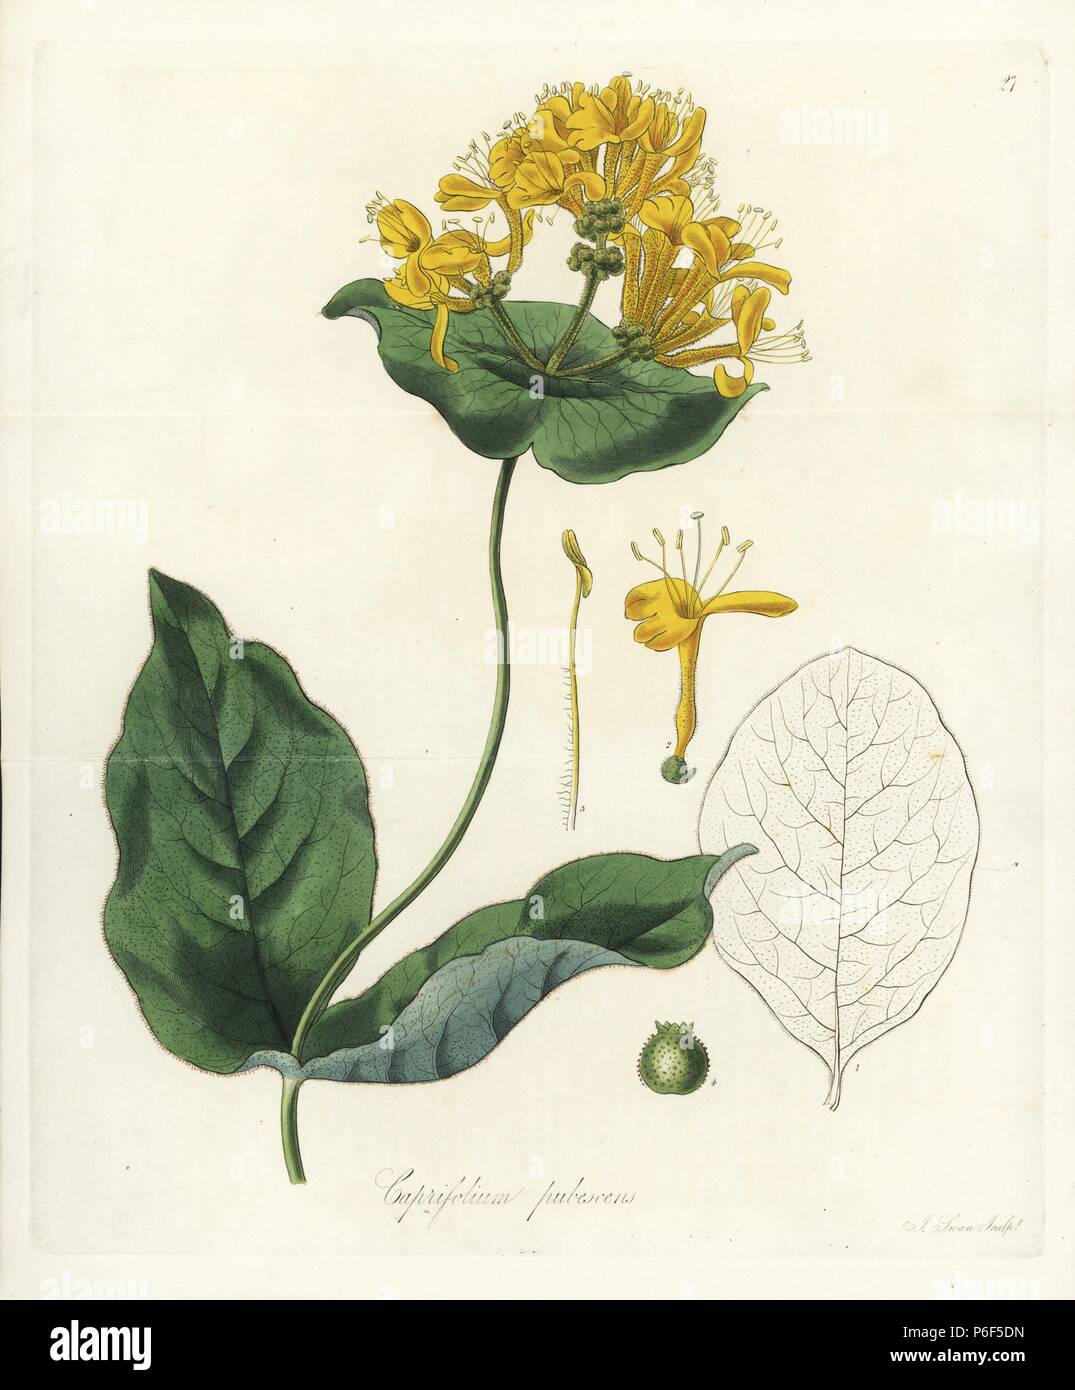 Hairy honeysuckle, Lonicera hirsuta (Downy American woodbine, Caprifolium pubescens). Handcoloured copperplate engraving by J. Swan after a botanical illustration by William Jackson Hooker from his own 'Exotic Flora,' Blackwood, Edinburgh, 1823. Hooker (1785-1865) was an English botanist who specialized in orchids and ferns, and was director of the Royal Botanical Gardens at Kew from 1841. Stock Photo